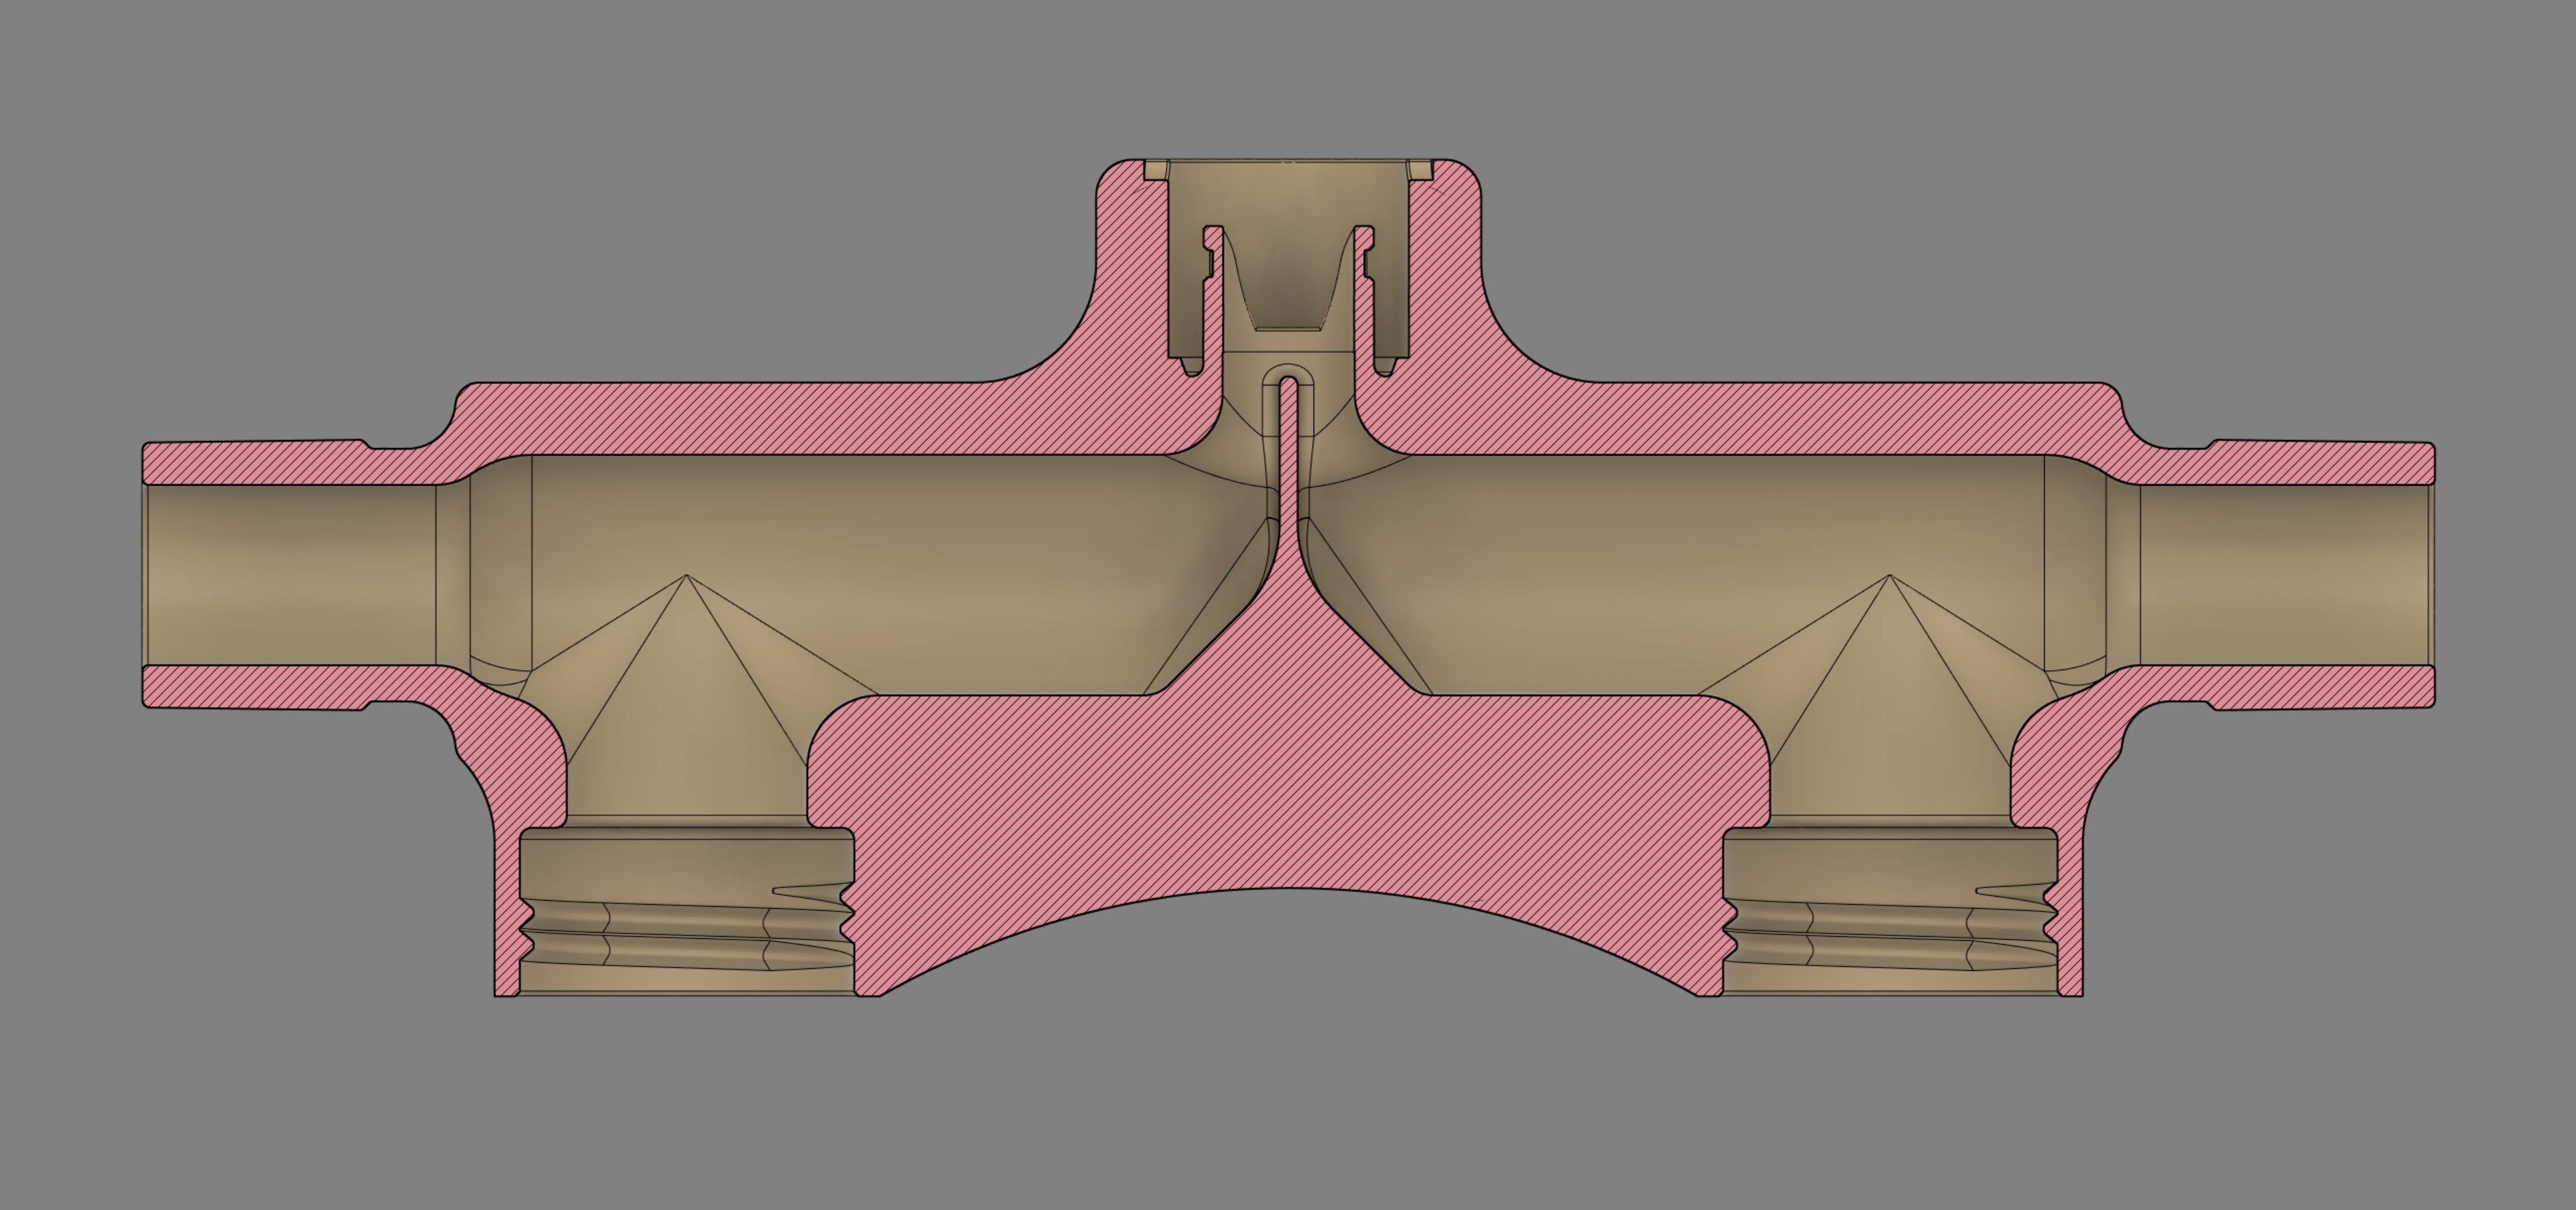 T-Shaped Connector Cross Section